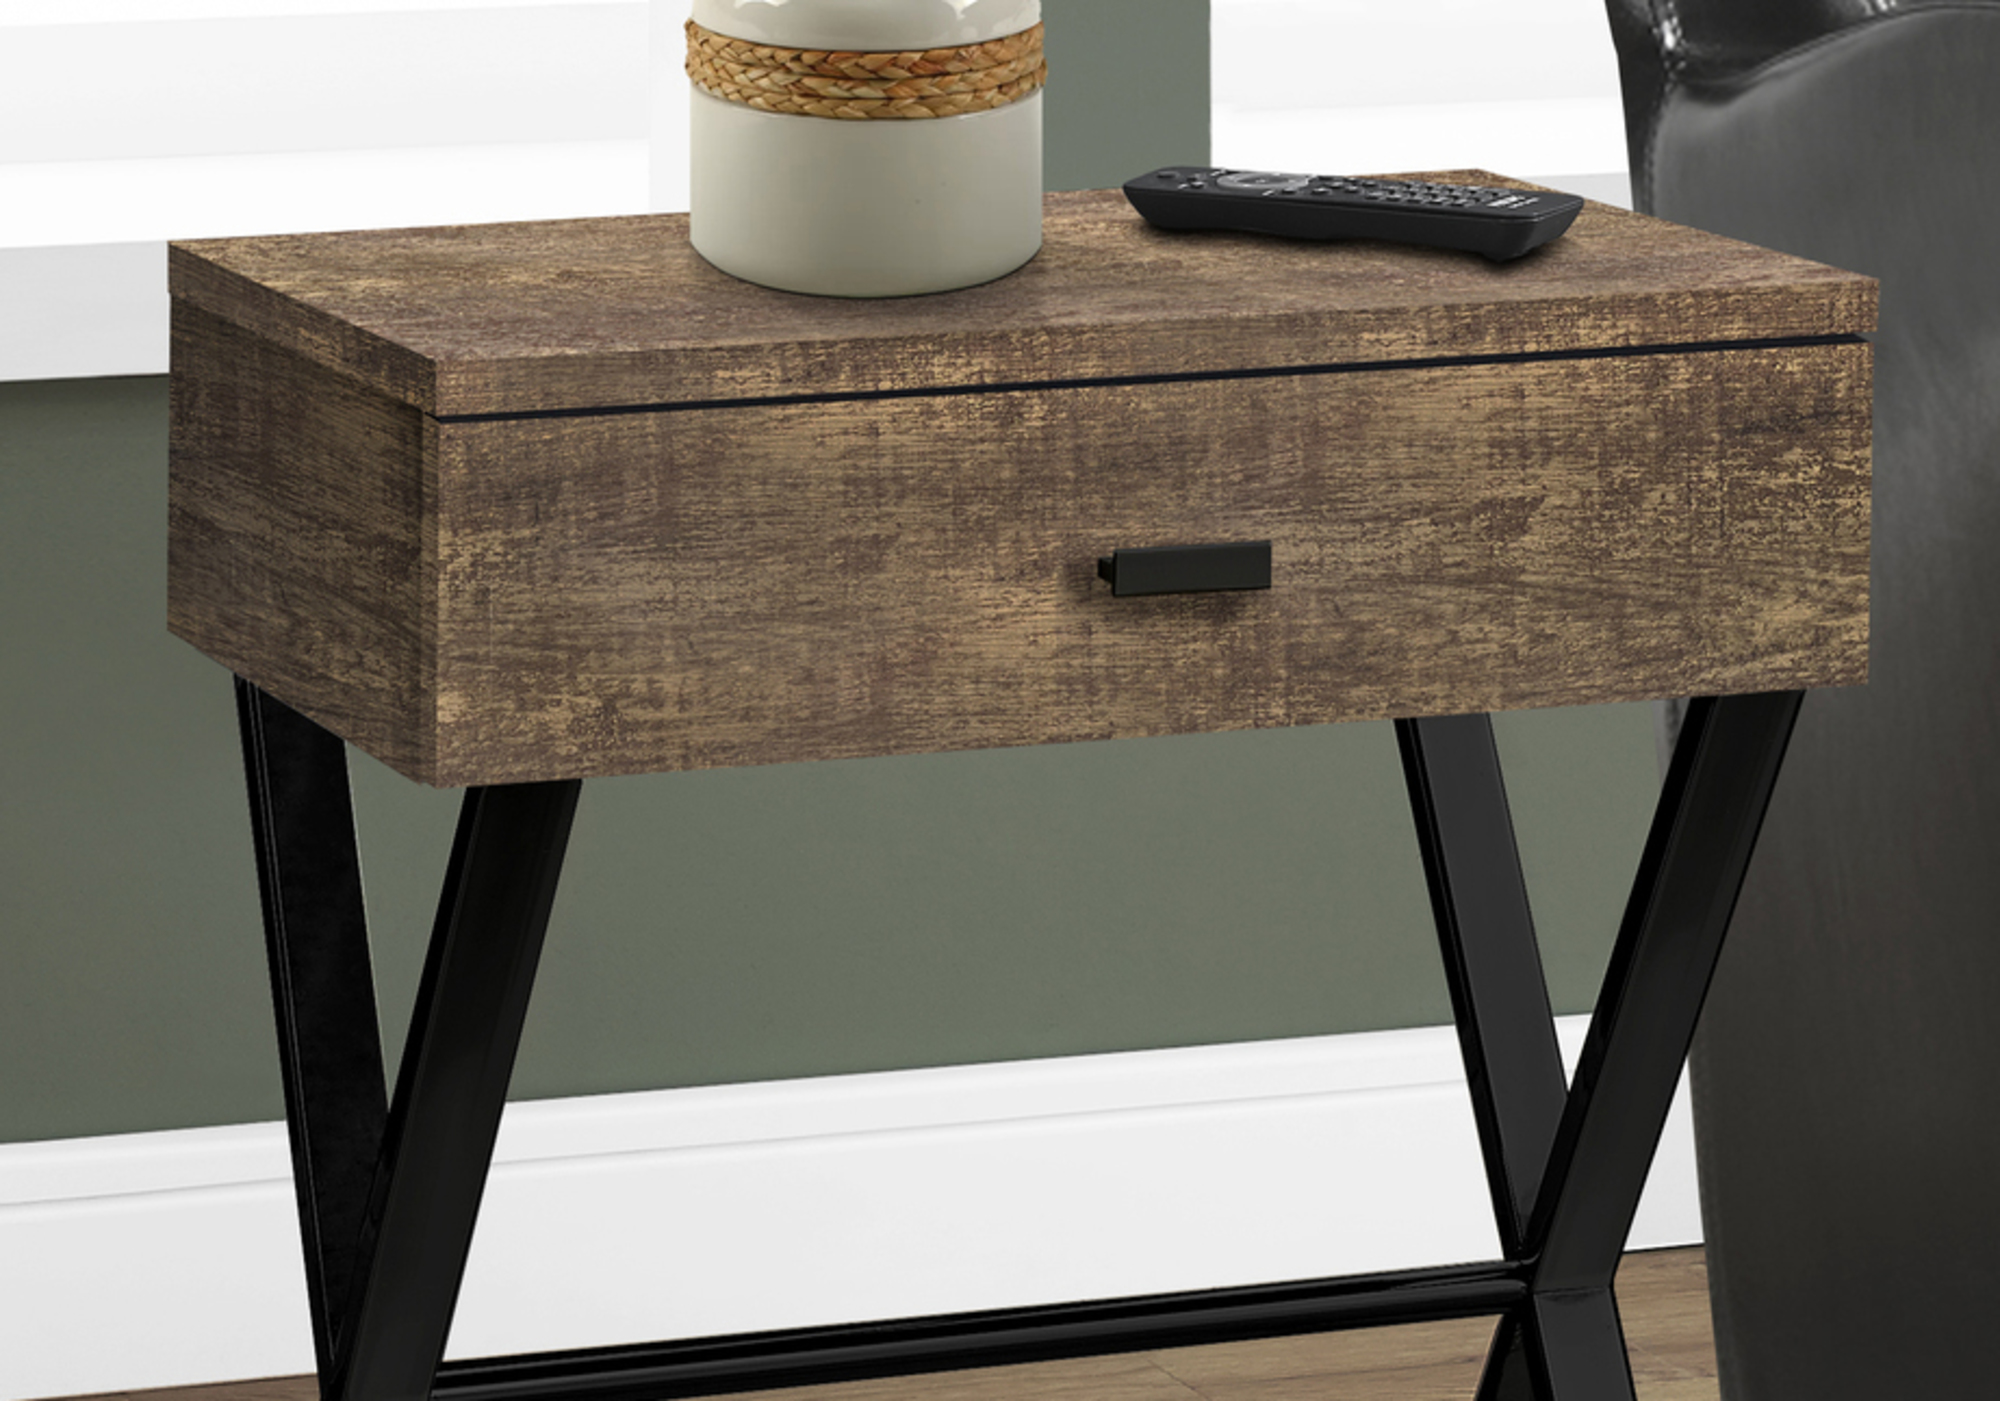 ACCENT TABLE - 24"H / BROWN RECLAIMED WOOD / BLACK METAL